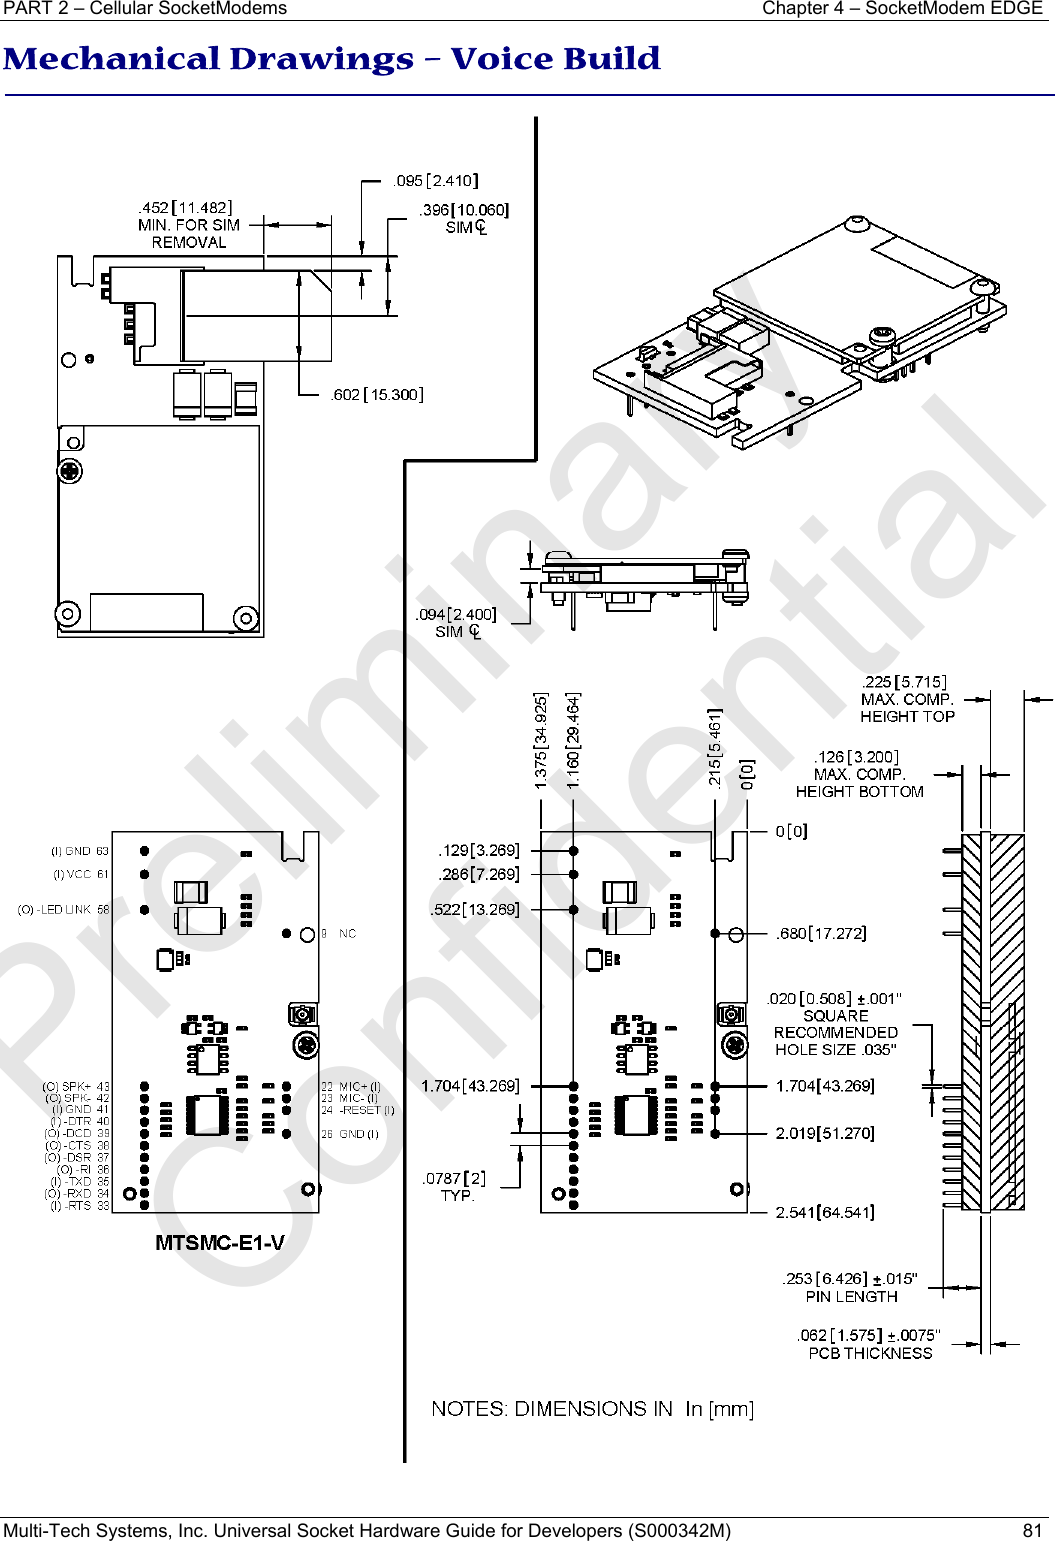 PART 2 – Cellular SocketModems  Chapter 4 – SocketModem EDGE Multi-Tech Systems, Inc. Universal Socket Hardware Guide for Developers (S000342M)  81  Mechanical Drawings – Voice Build Preliminary  Confidential